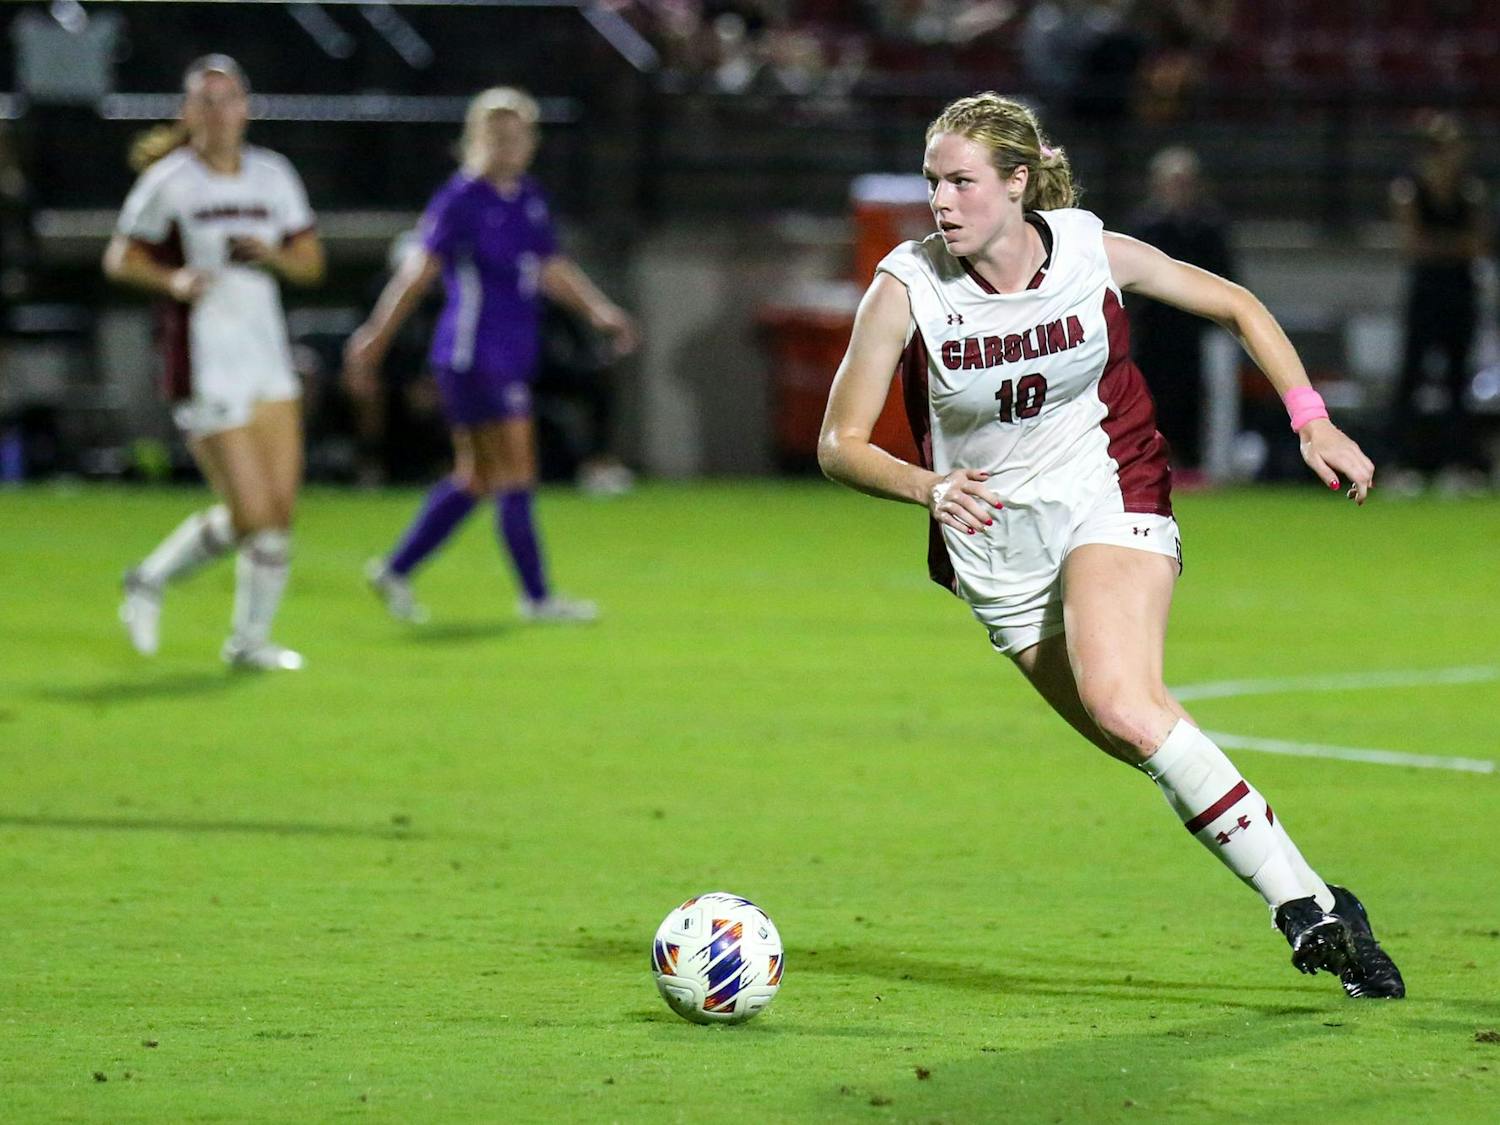 Senior forward Catherine Barry advances upfield during South Carolina’s match against LSU at Stone Stadium on Oct. 5, 2023. The Gamecocks beat the Tigers 1-0.